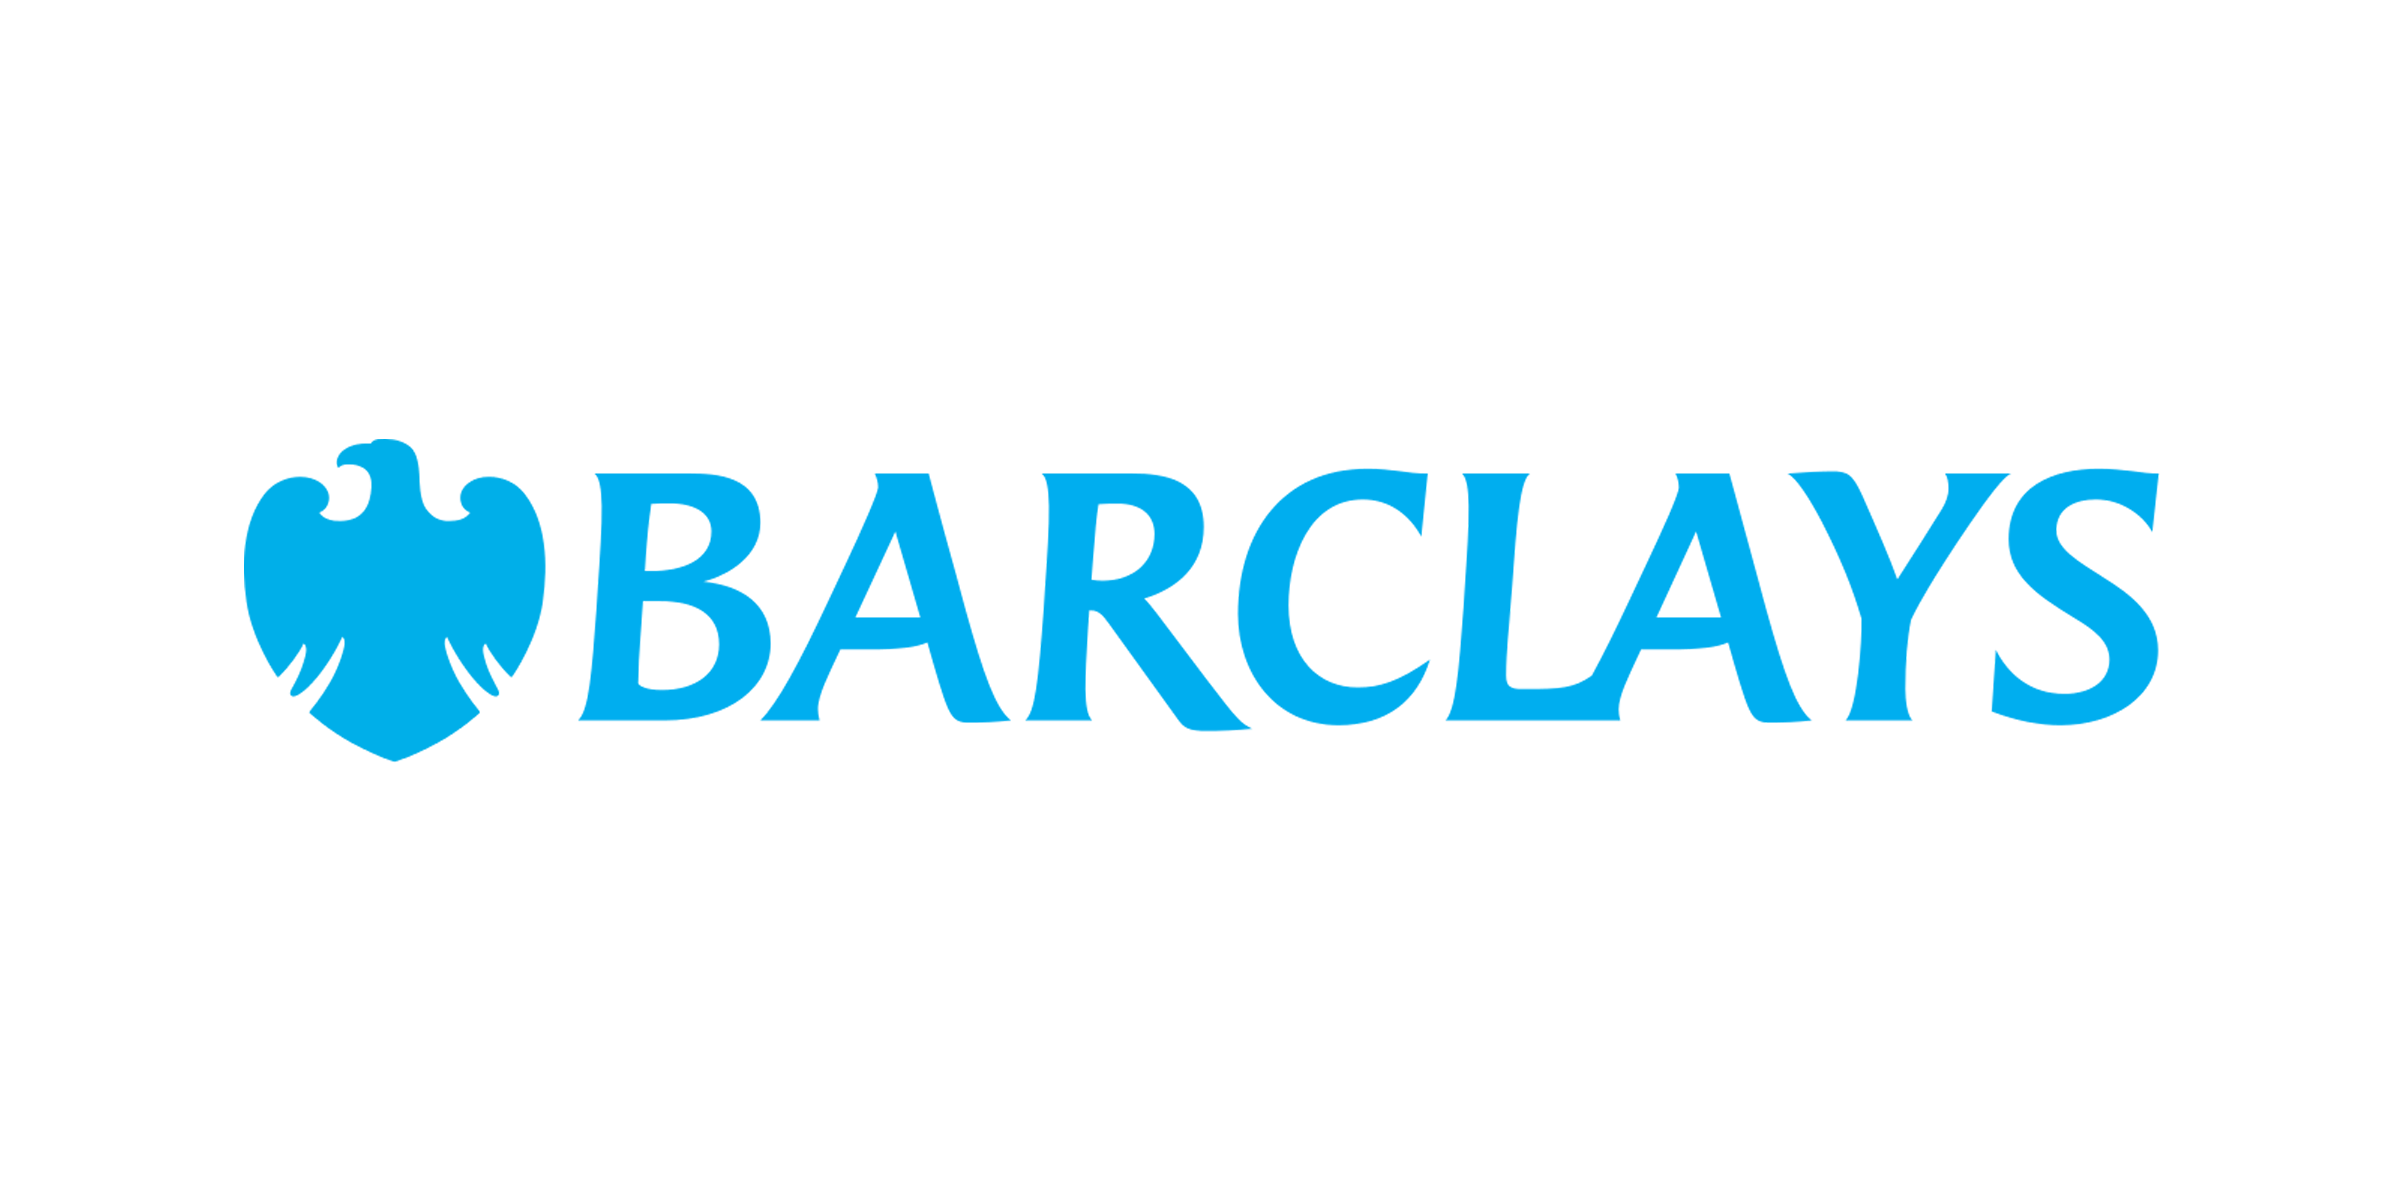 Barclays.png